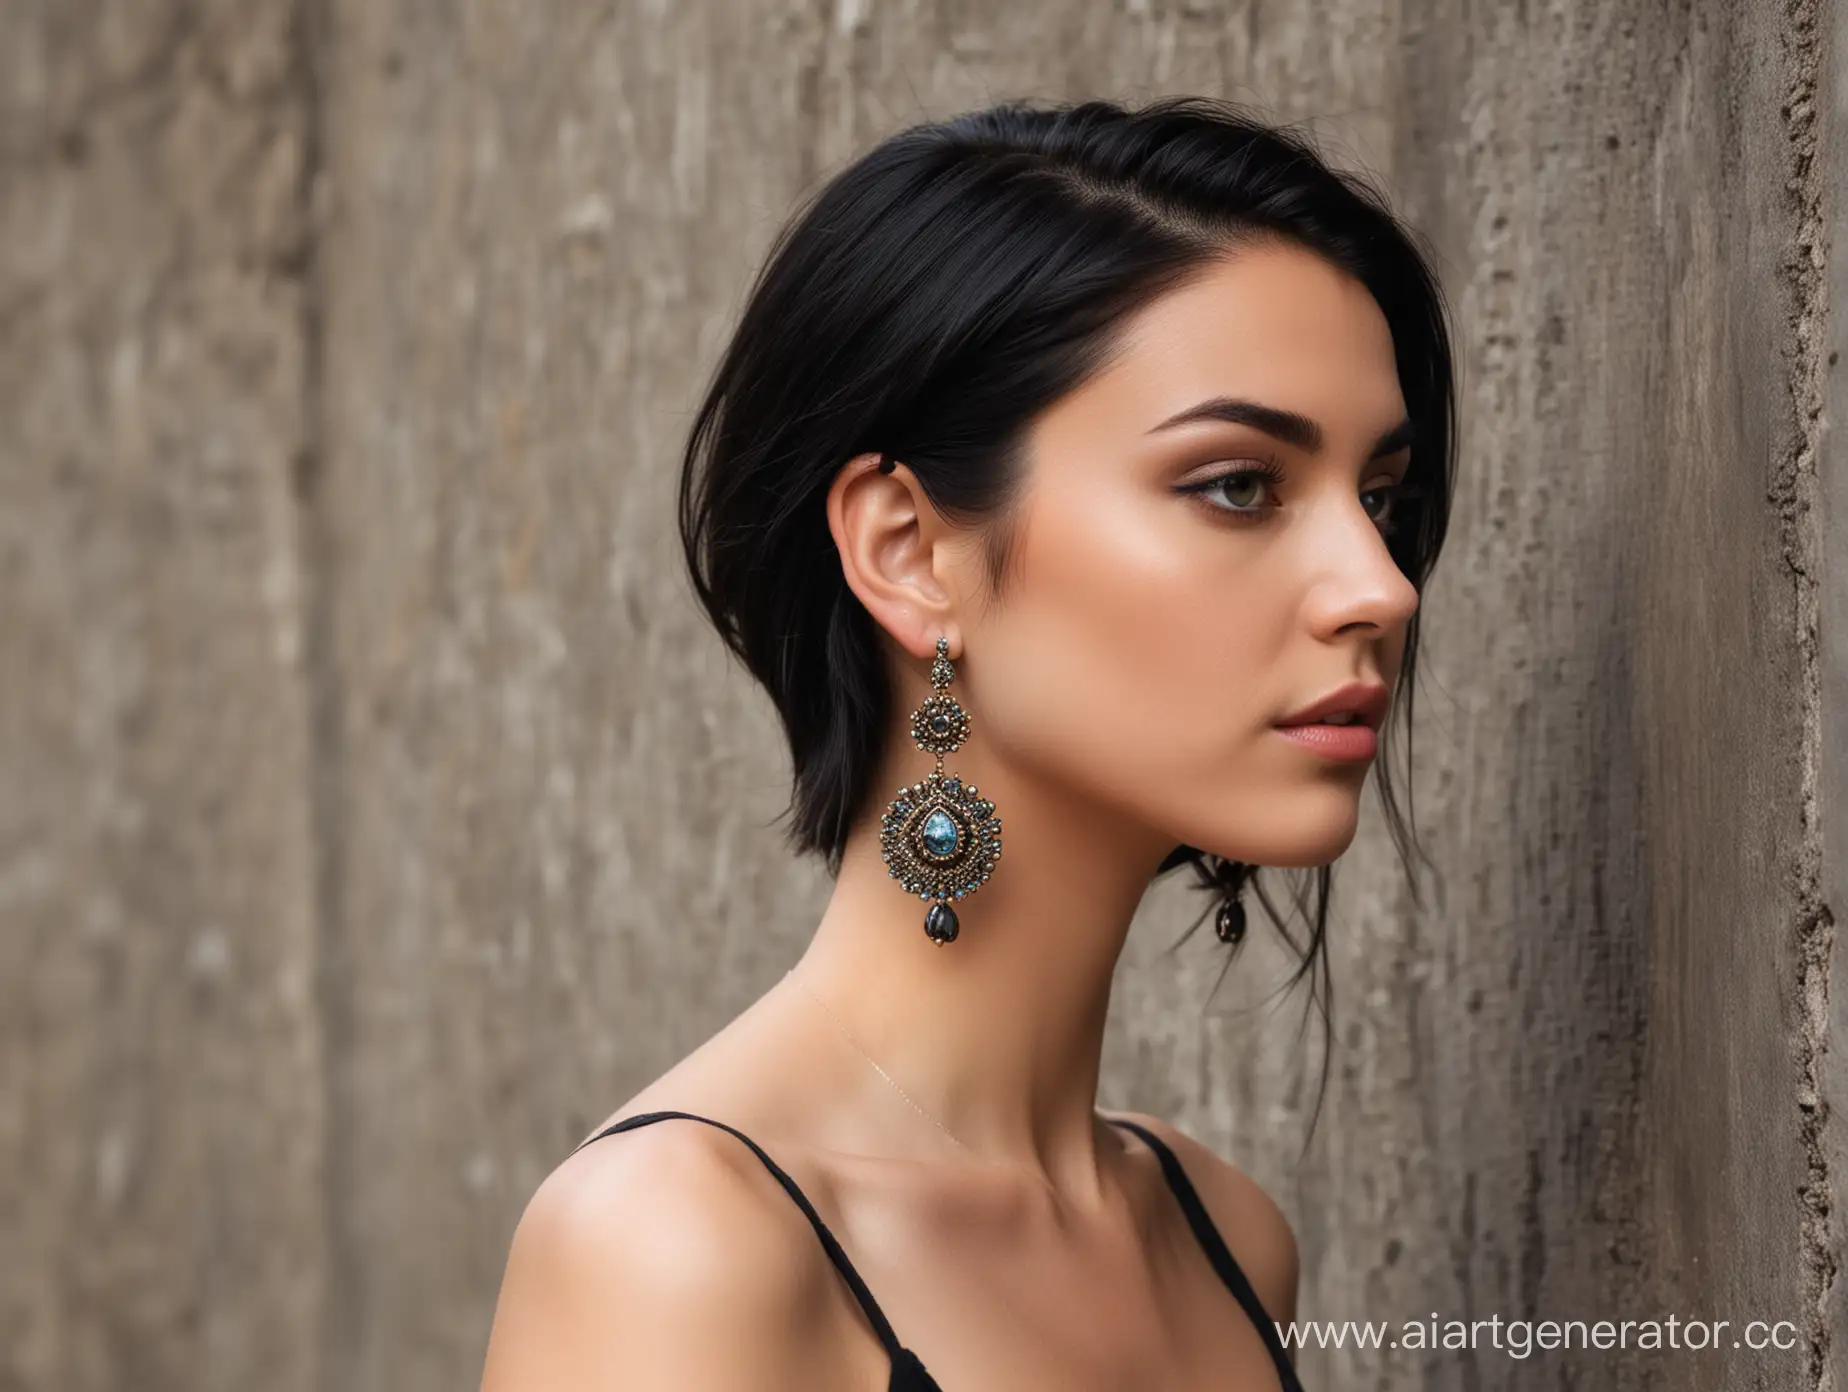 Elegant-Profile-Portrait-of-a-Young-Woman-with-Divine-Earrings